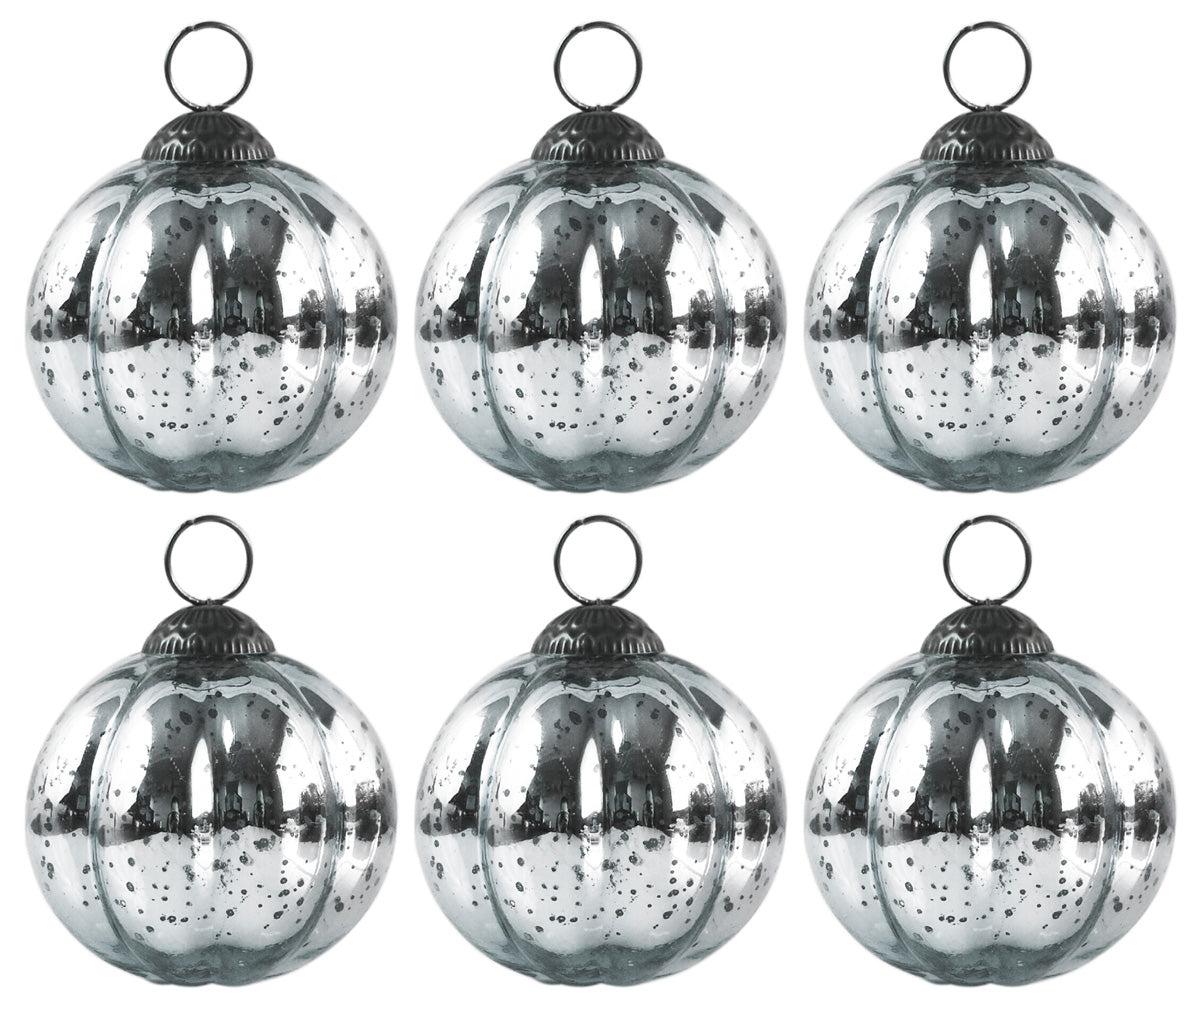 6 Pack | Large Mercury Glass Ball Ornaments (3-Inch, Silver, Posey Ball Design) - Great Gift Idea, Vintage-Style Decorations for Christmas